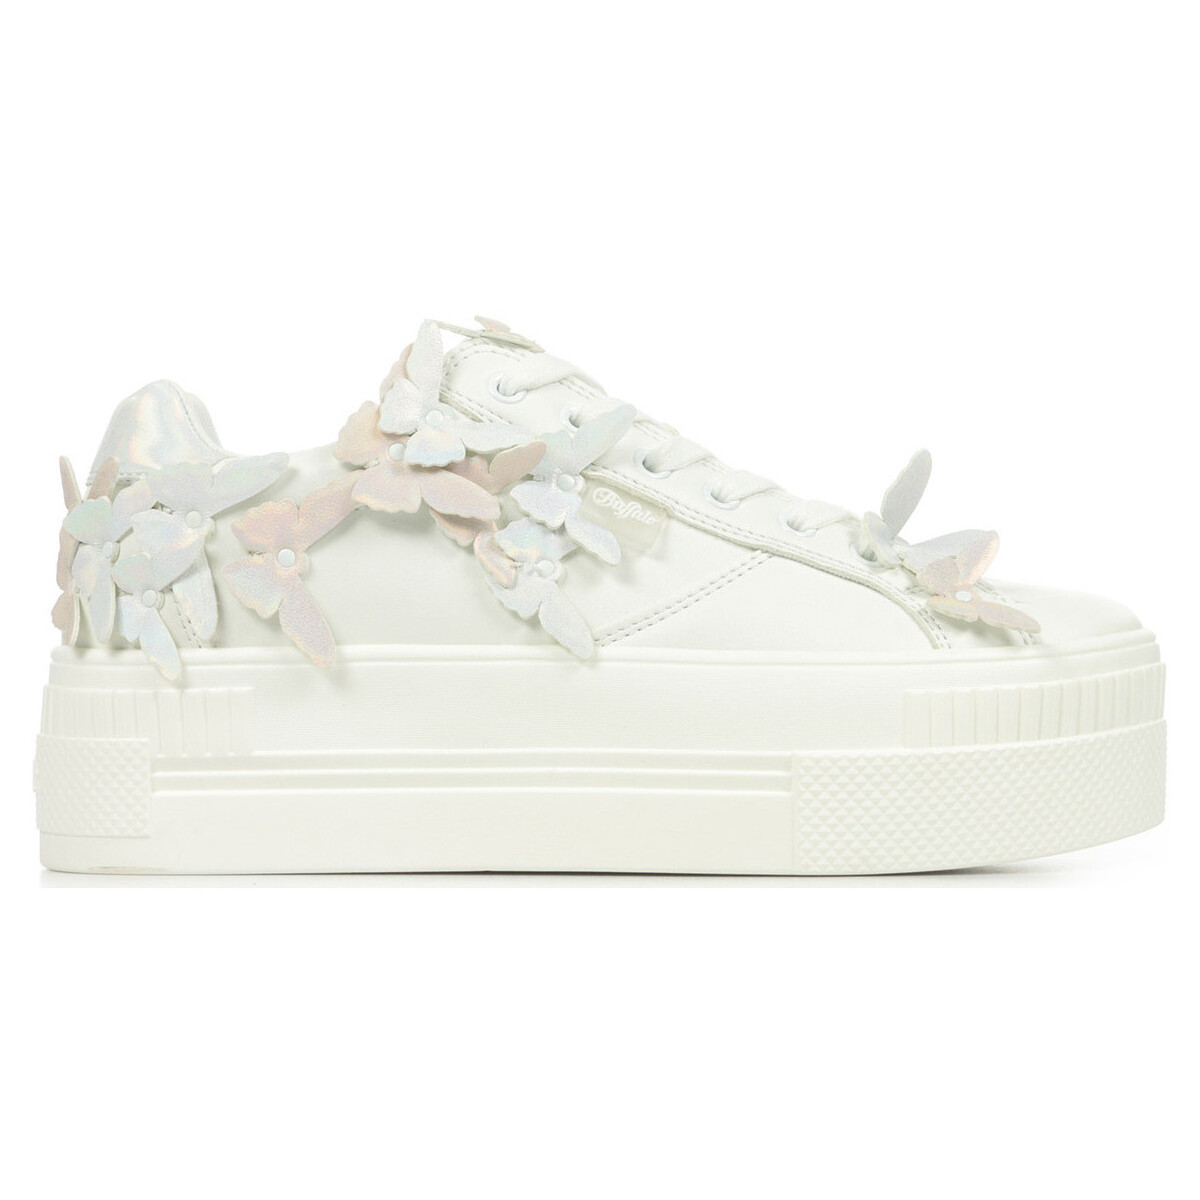 Sapatos Mulher Sapatilhas Buffalo Paired Butterfly Branco